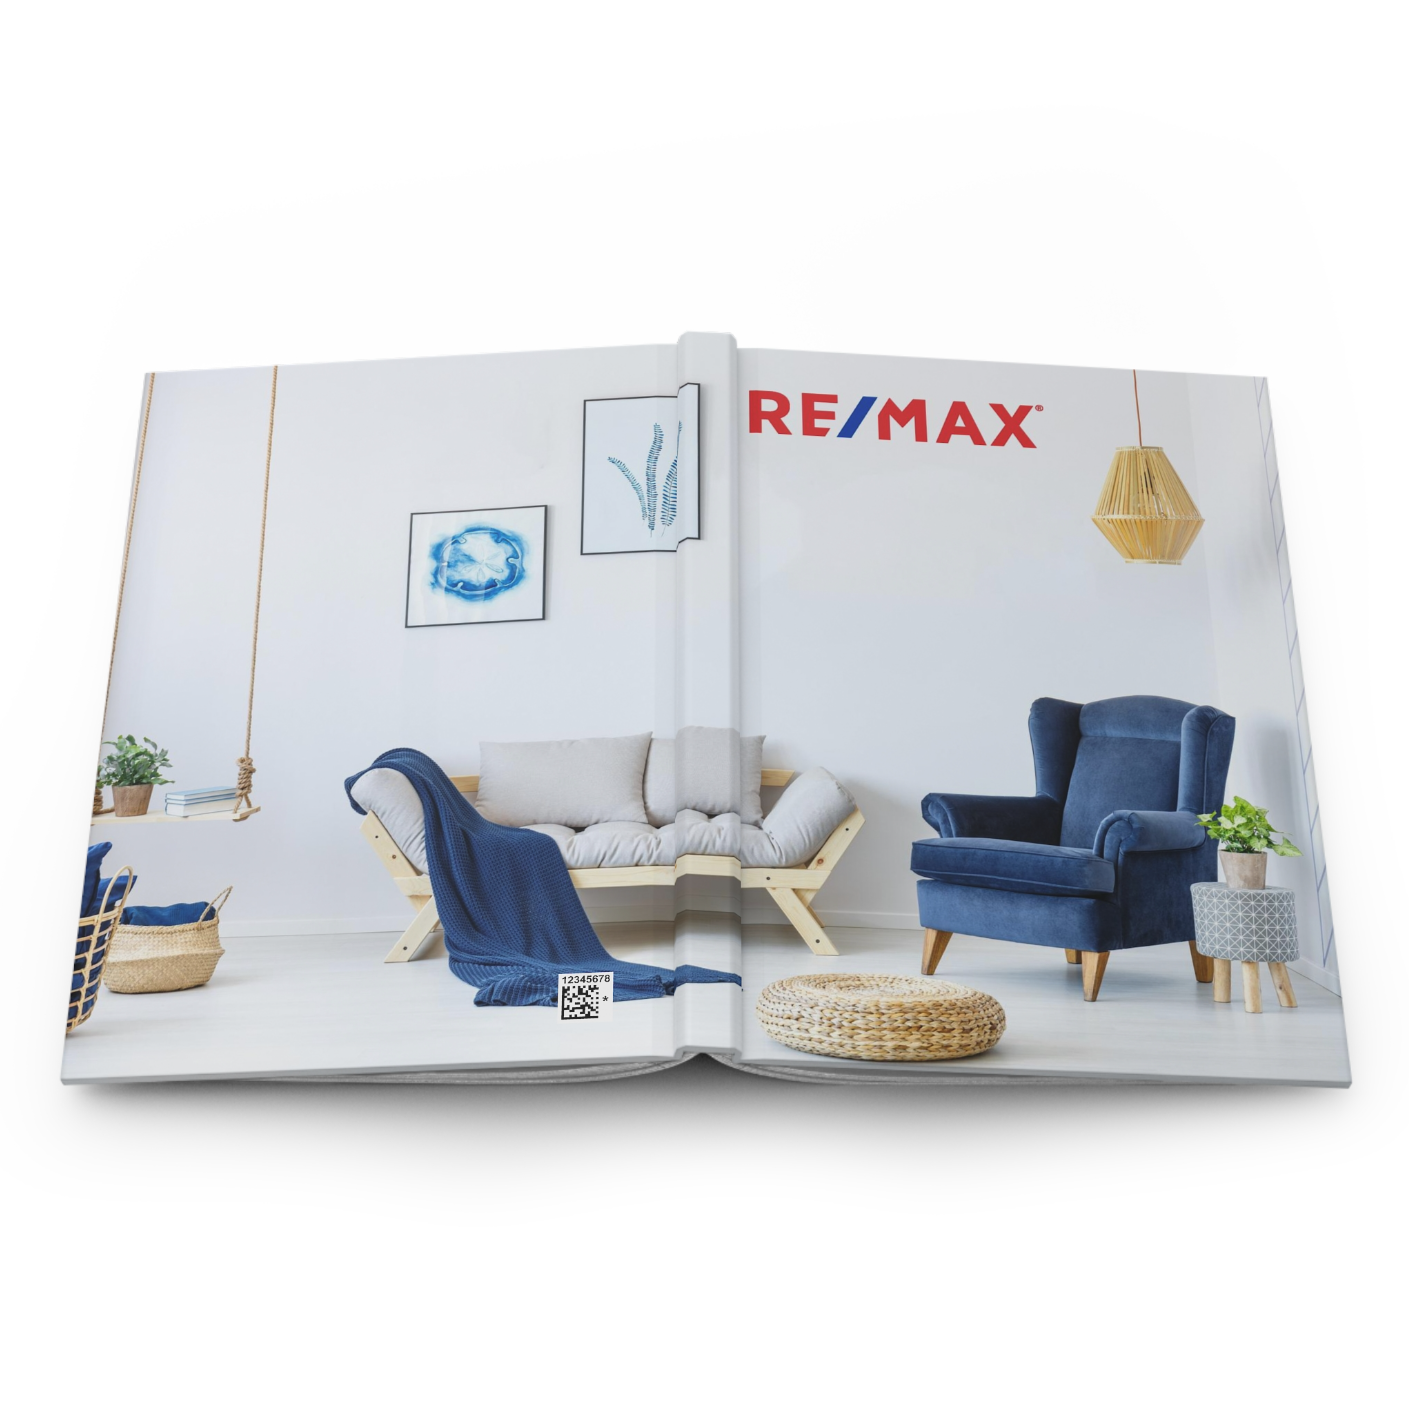 RE/MAX Full Color Hardcover Binders Interior (from as low as $10.46 per cover)